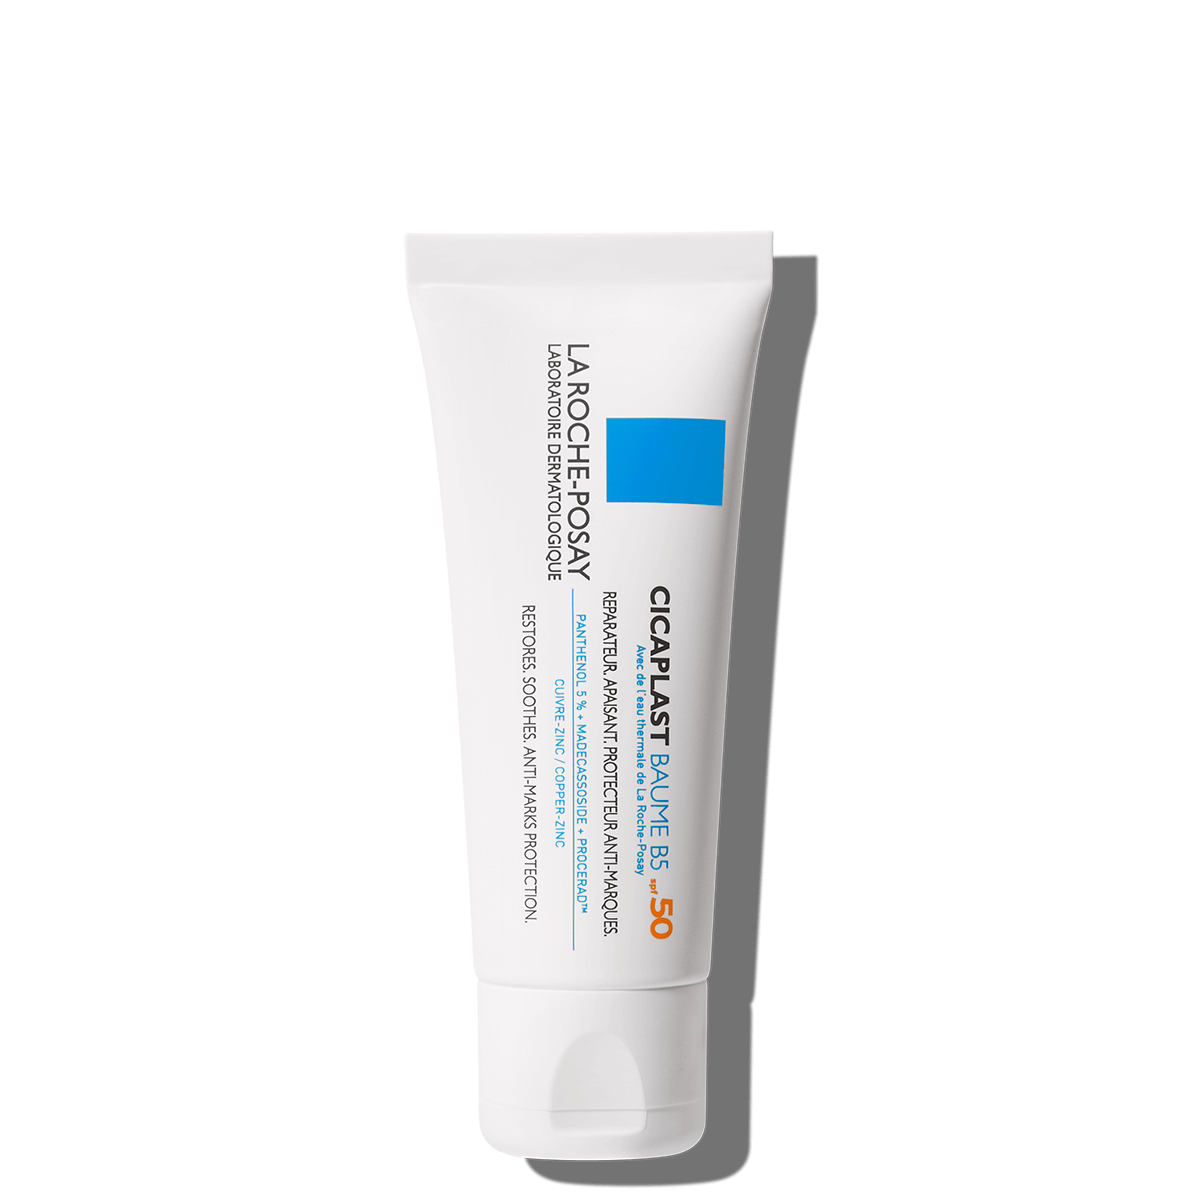 La Roche Posay ProductPage Damaged Cicaplast Baume B5 Spf50 40ml 3337875517300 Front